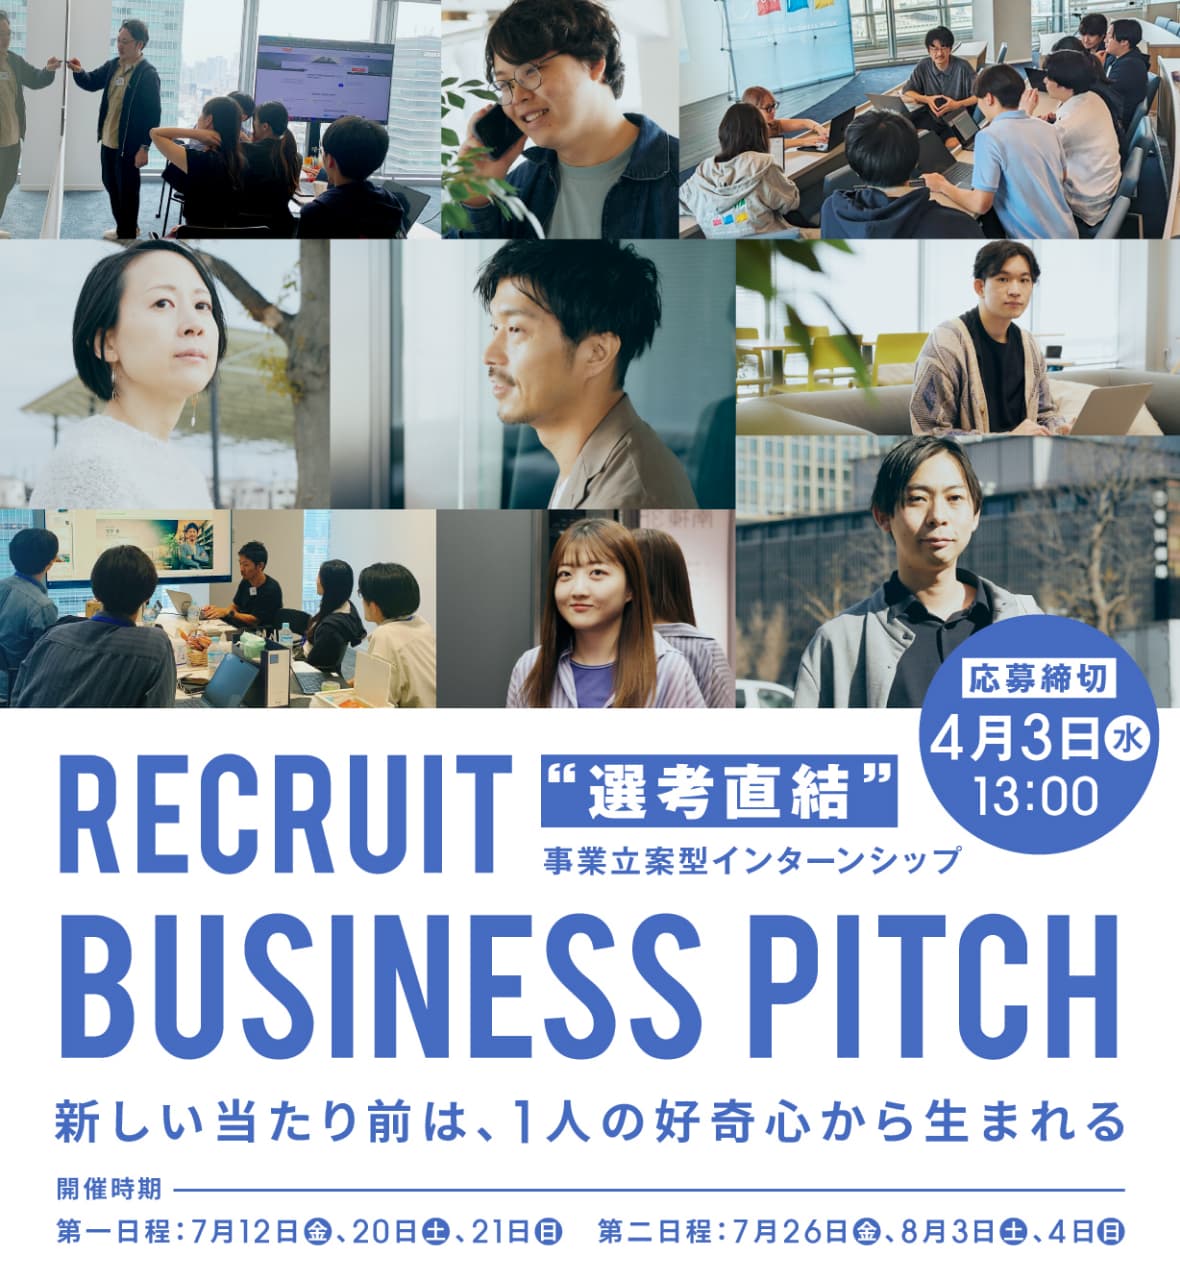 RECRUIT BUSINESS PITCH 選考直結事業立案型インターンシップ